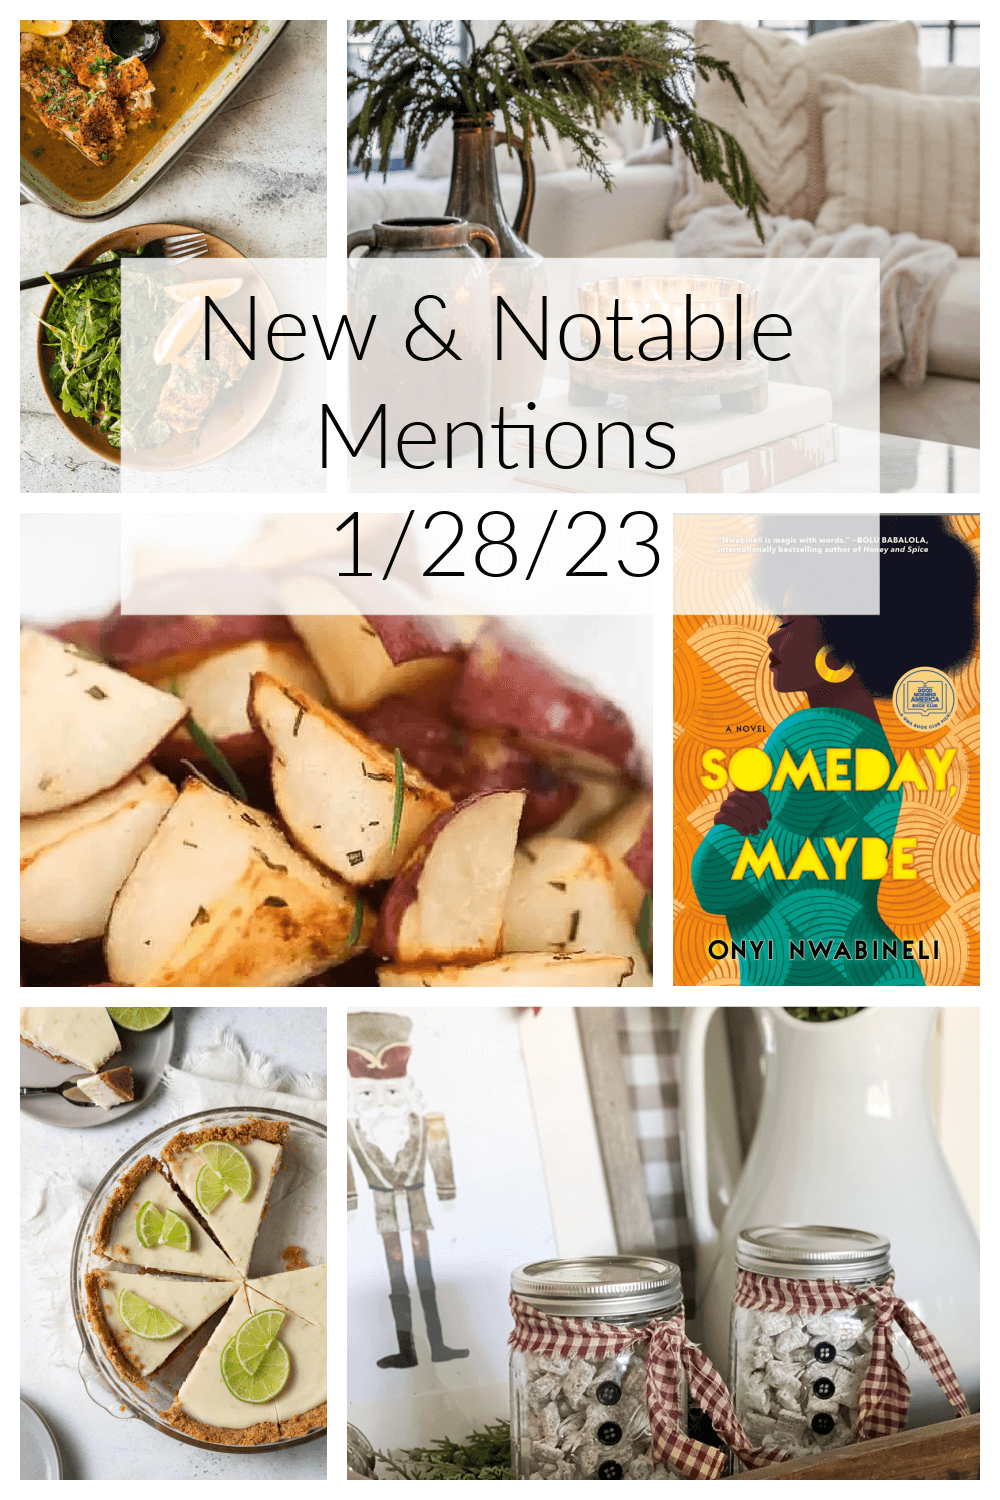 New & Notable Mentions 1/28/23